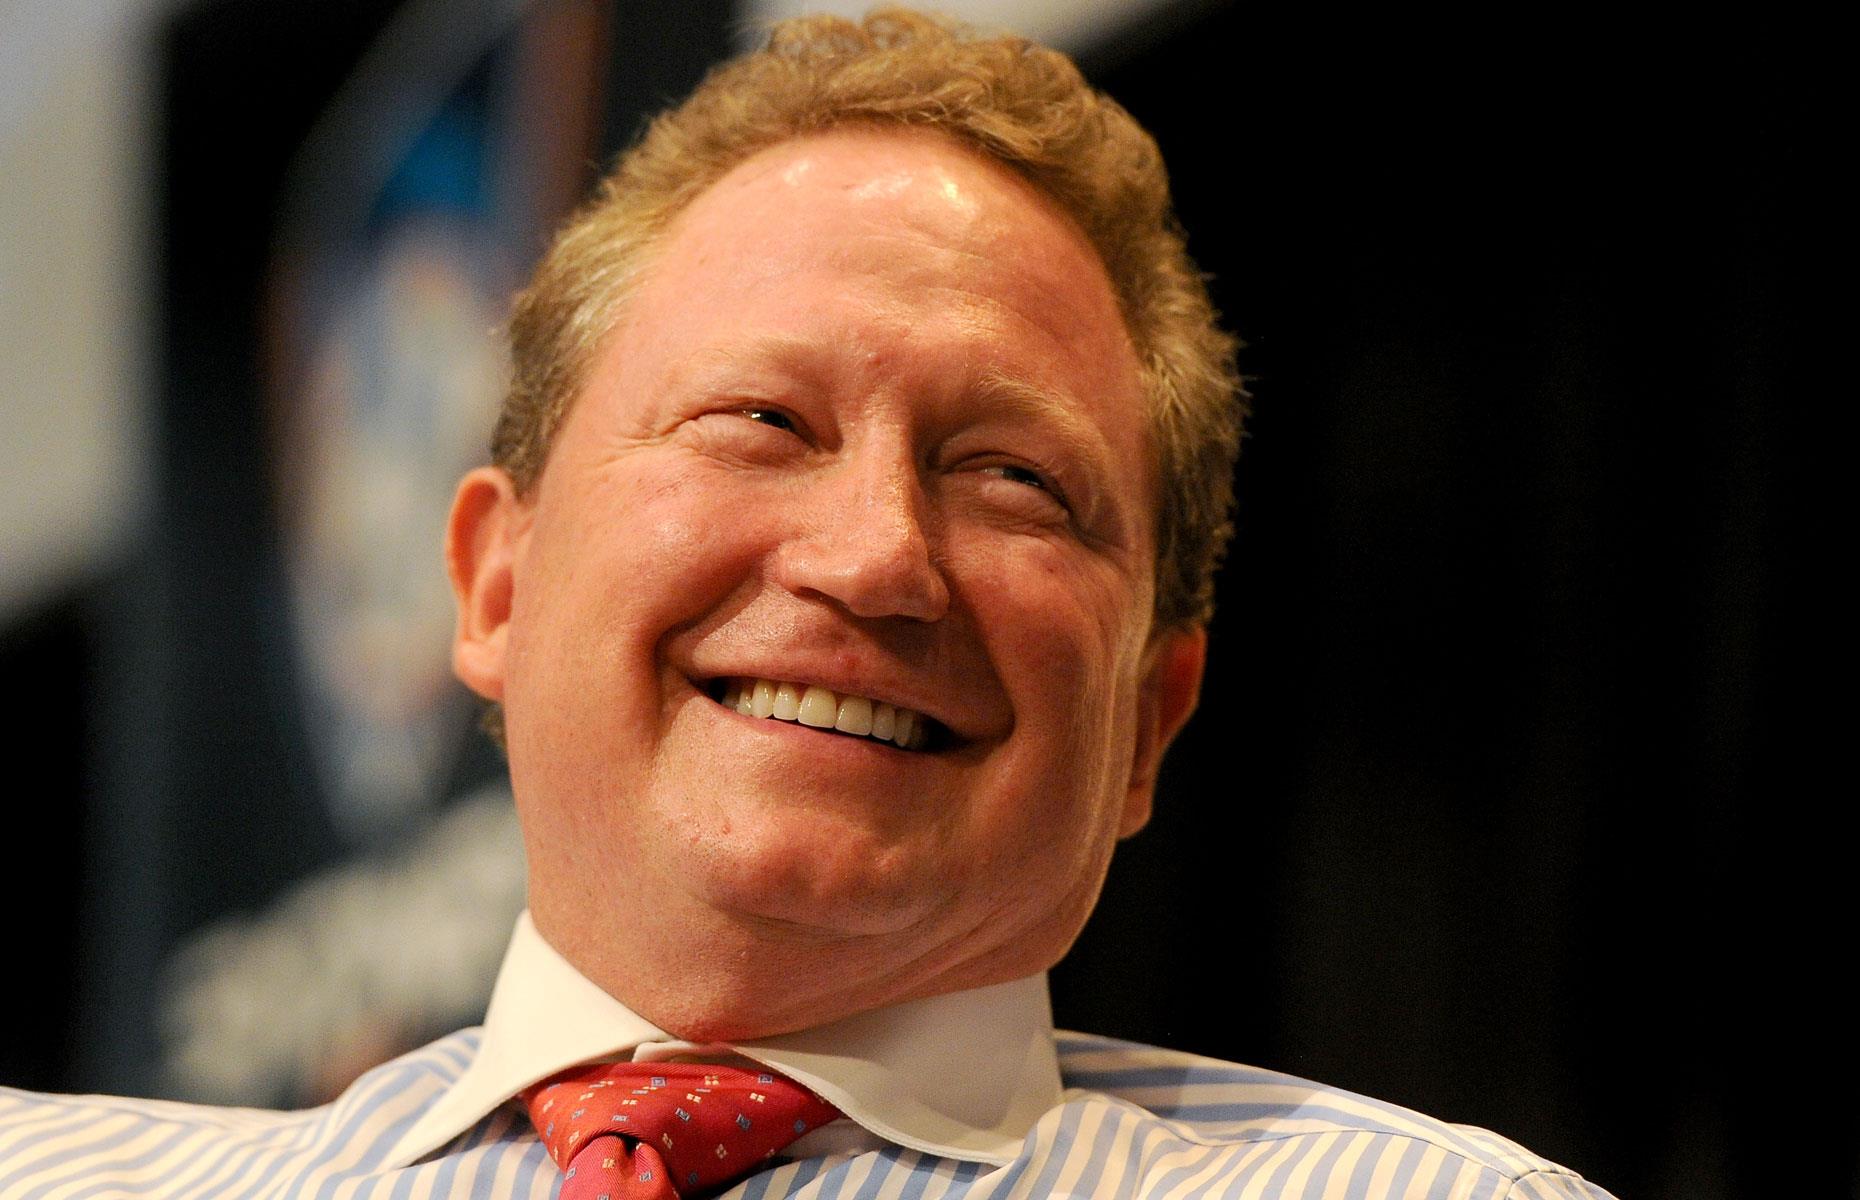 24. Andrew 'Twiggy' Forrest: 1.934 million hectares